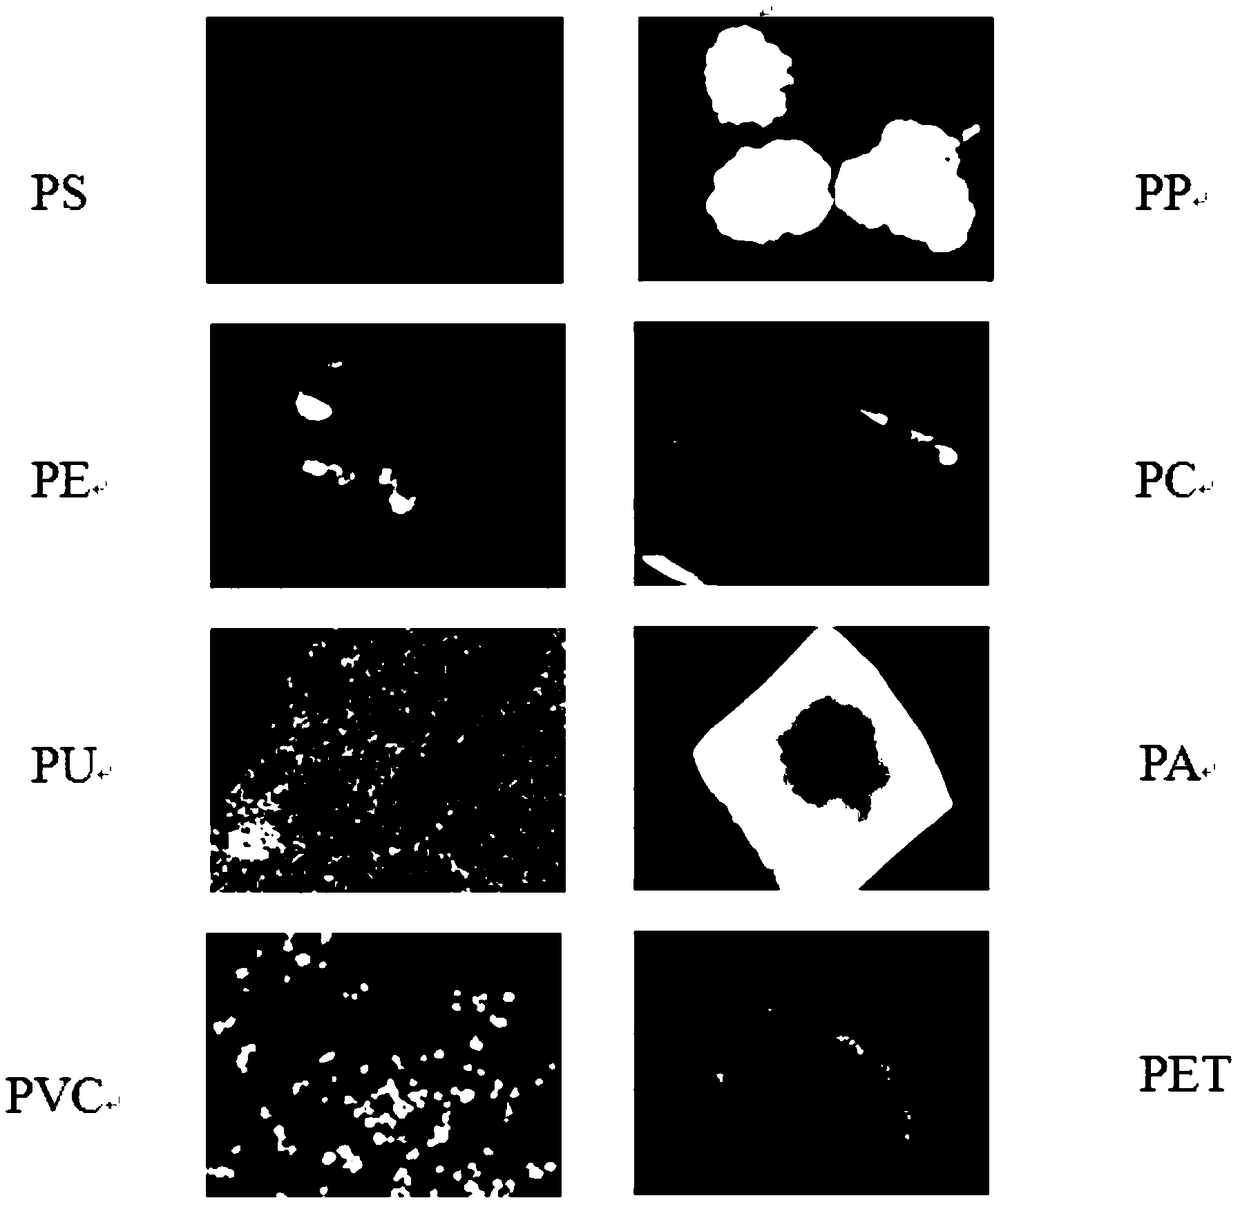 Method for rapid aided detection of micro-plastics in water environment samples by using Nile red dyeing